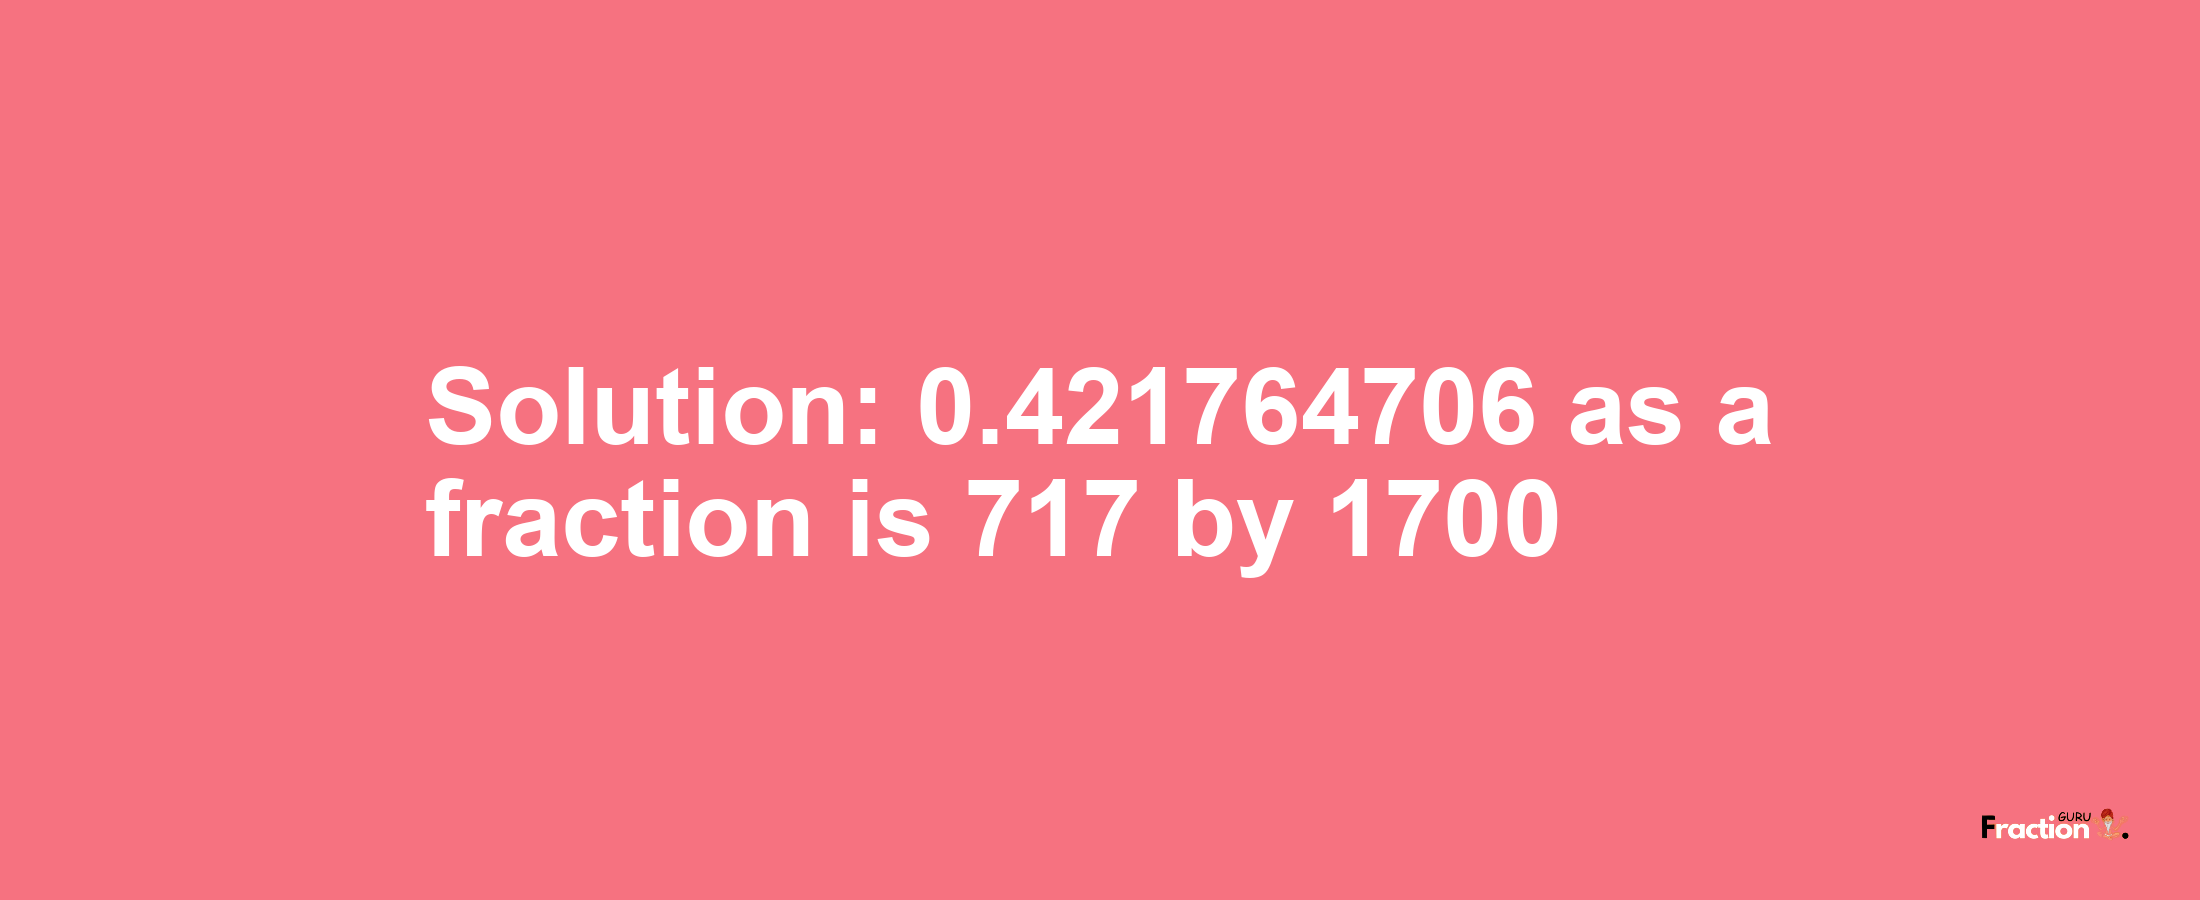 Solution:0.421764706 as a fraction is 717/1700